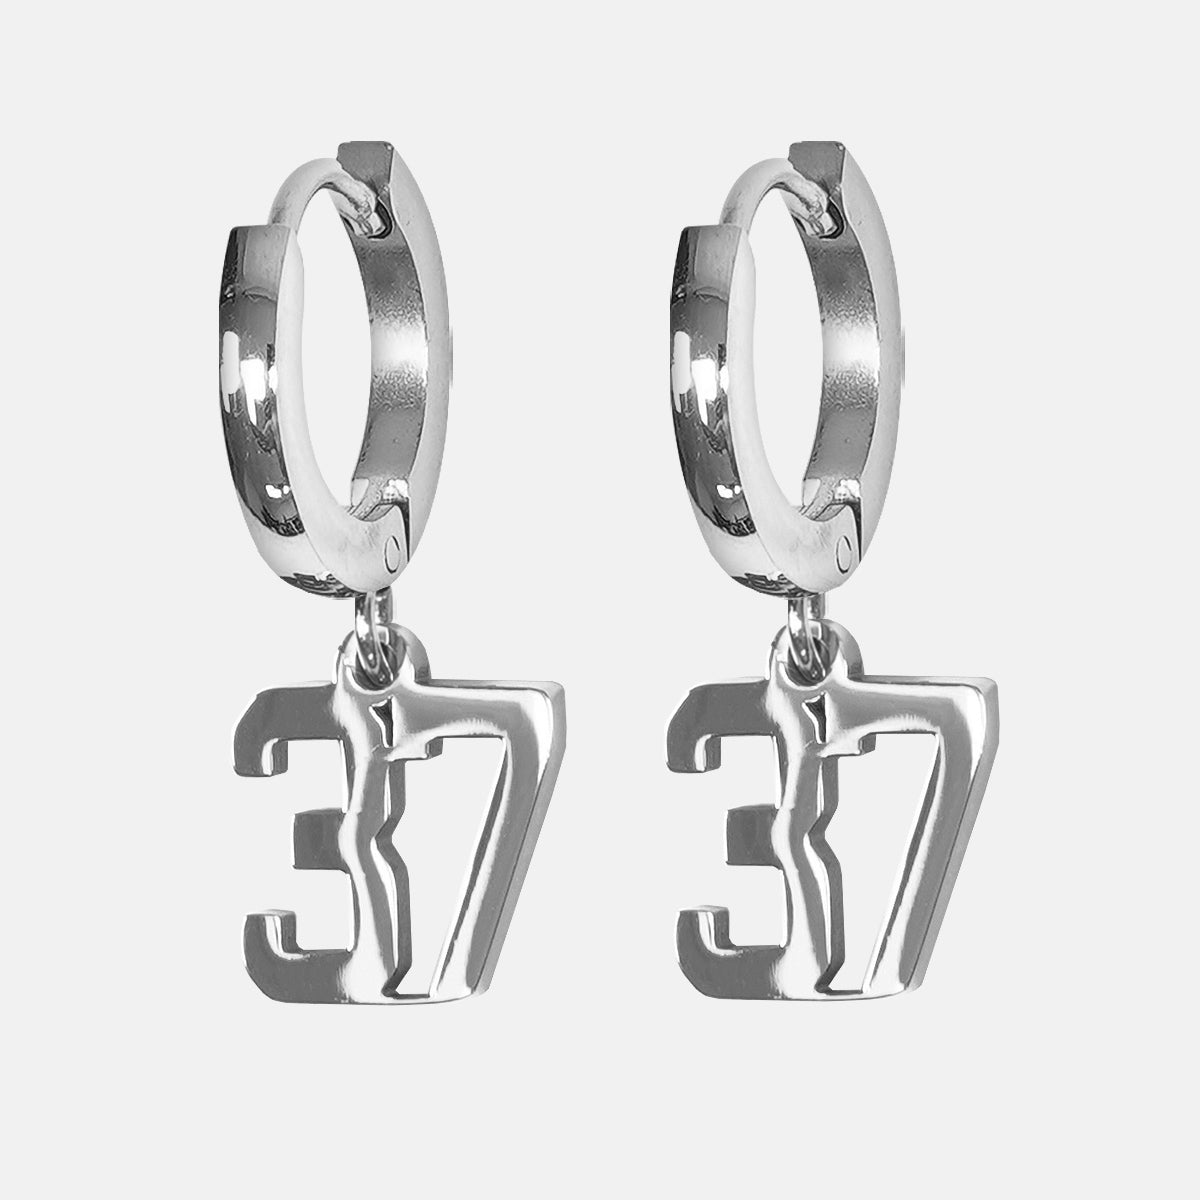 37 Number Earring - Stainless Steel